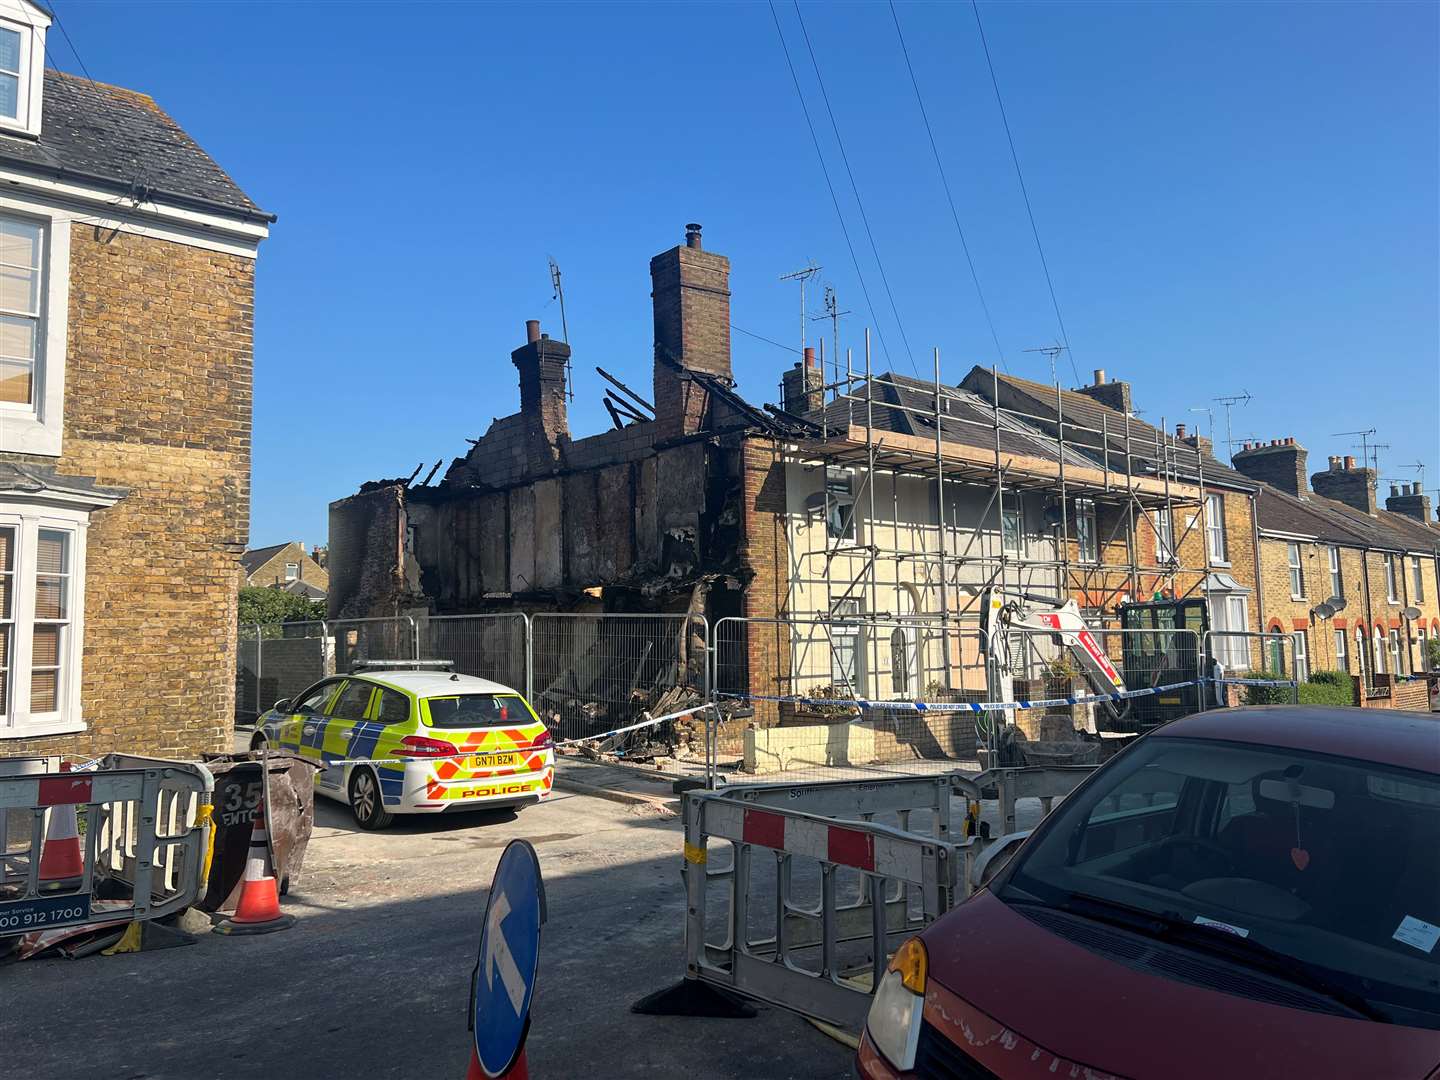 Police have confirmed a man has been arrested after a "suspicious" house fire in Faversham